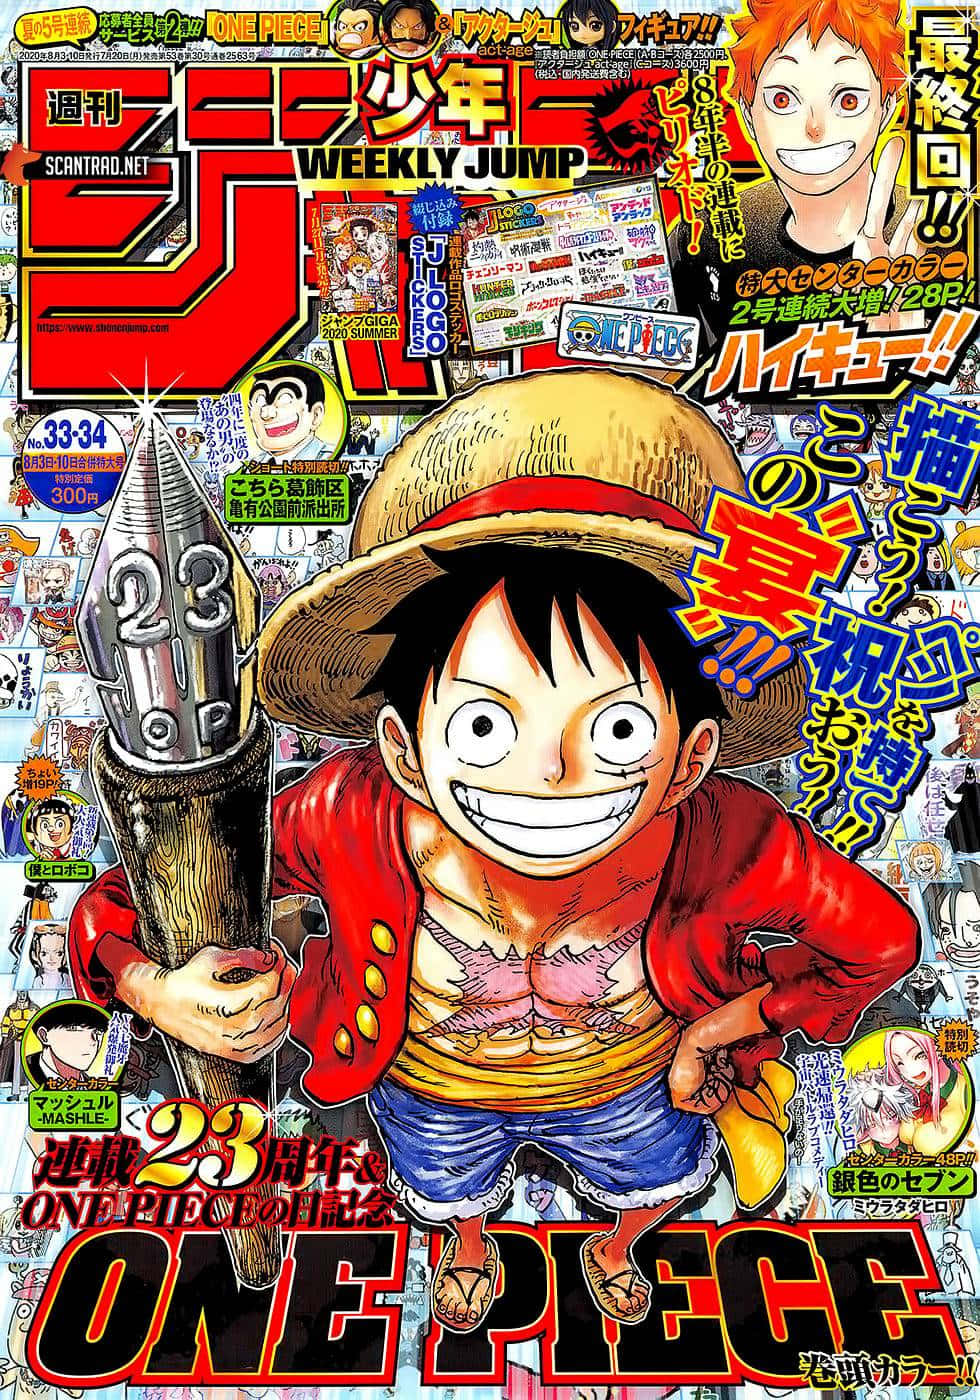 "Discover an exciting mix of stories and styles with Shonen Jump!" Wallpaper